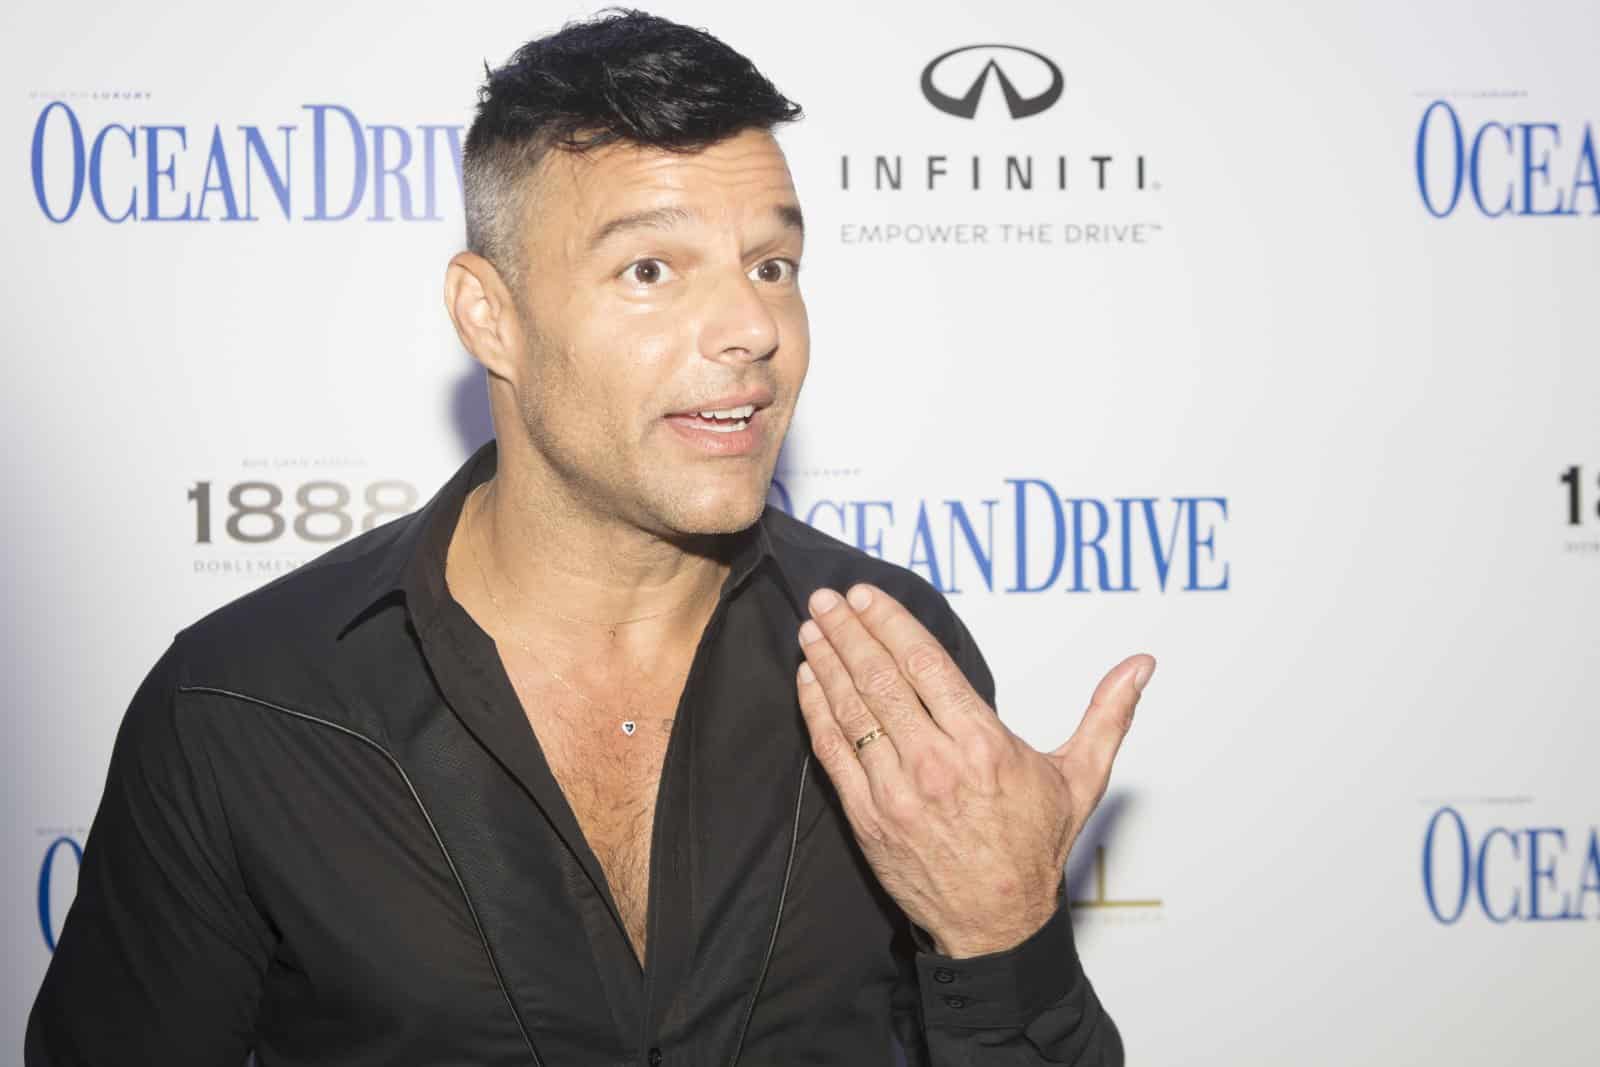 Image Credit: Shutterstock / Humberto Vidal <p><span>The pop sensation and “Livin’ la Vida Loca” singer broke hearts when he came out in 2010, becoming an icon for gay Latinos.</span></p>